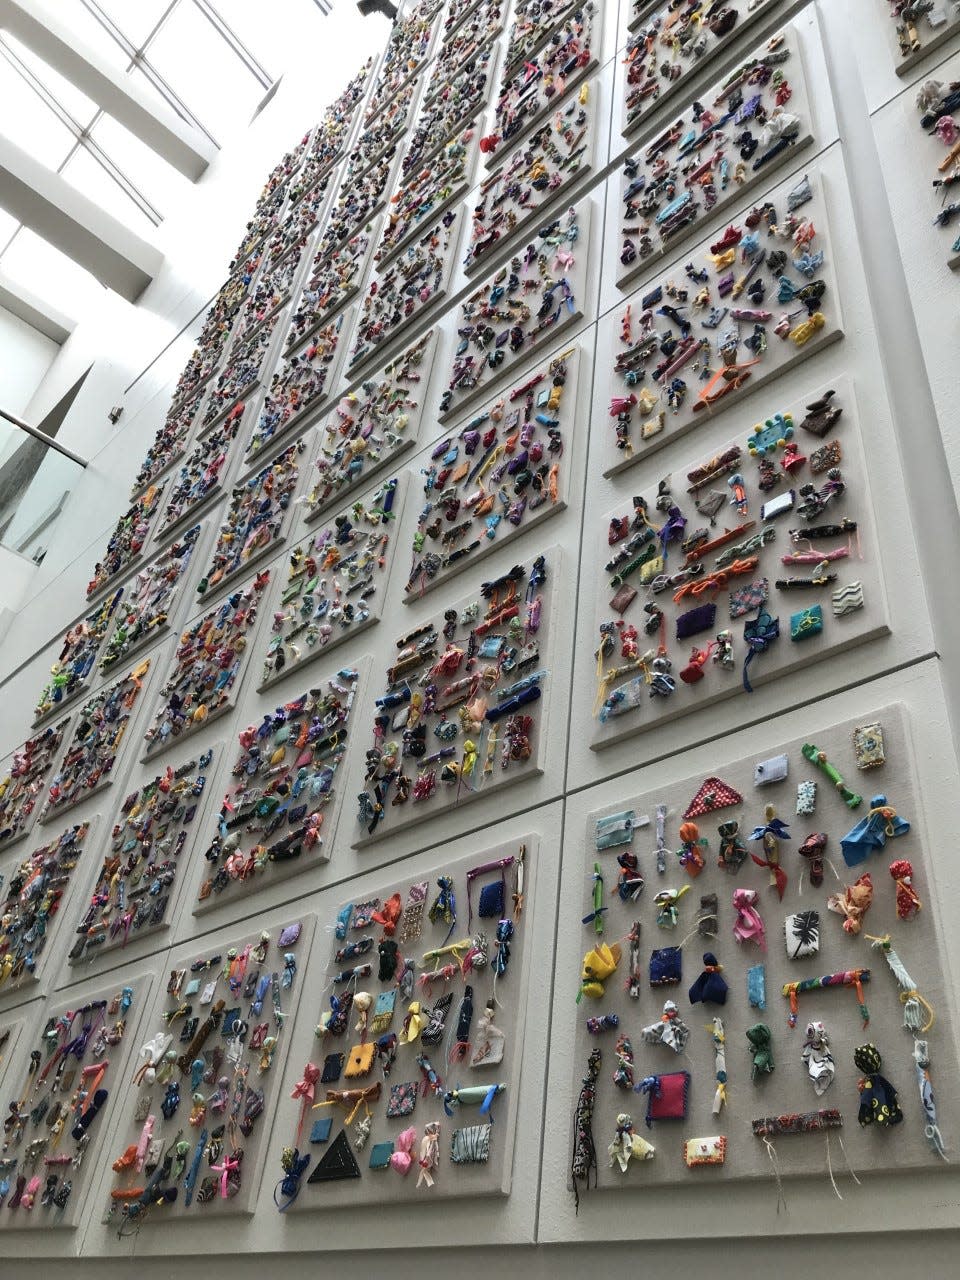 The Healing Memorial, which contains thousands of pouches created by metro Detroiters to recognize loss during the COVID-19 pandemic, in October 2022. It will be moving from inside Huntington Place in downtown Detroit to the Cranbrook Art Museum in Bloomfield Hills.